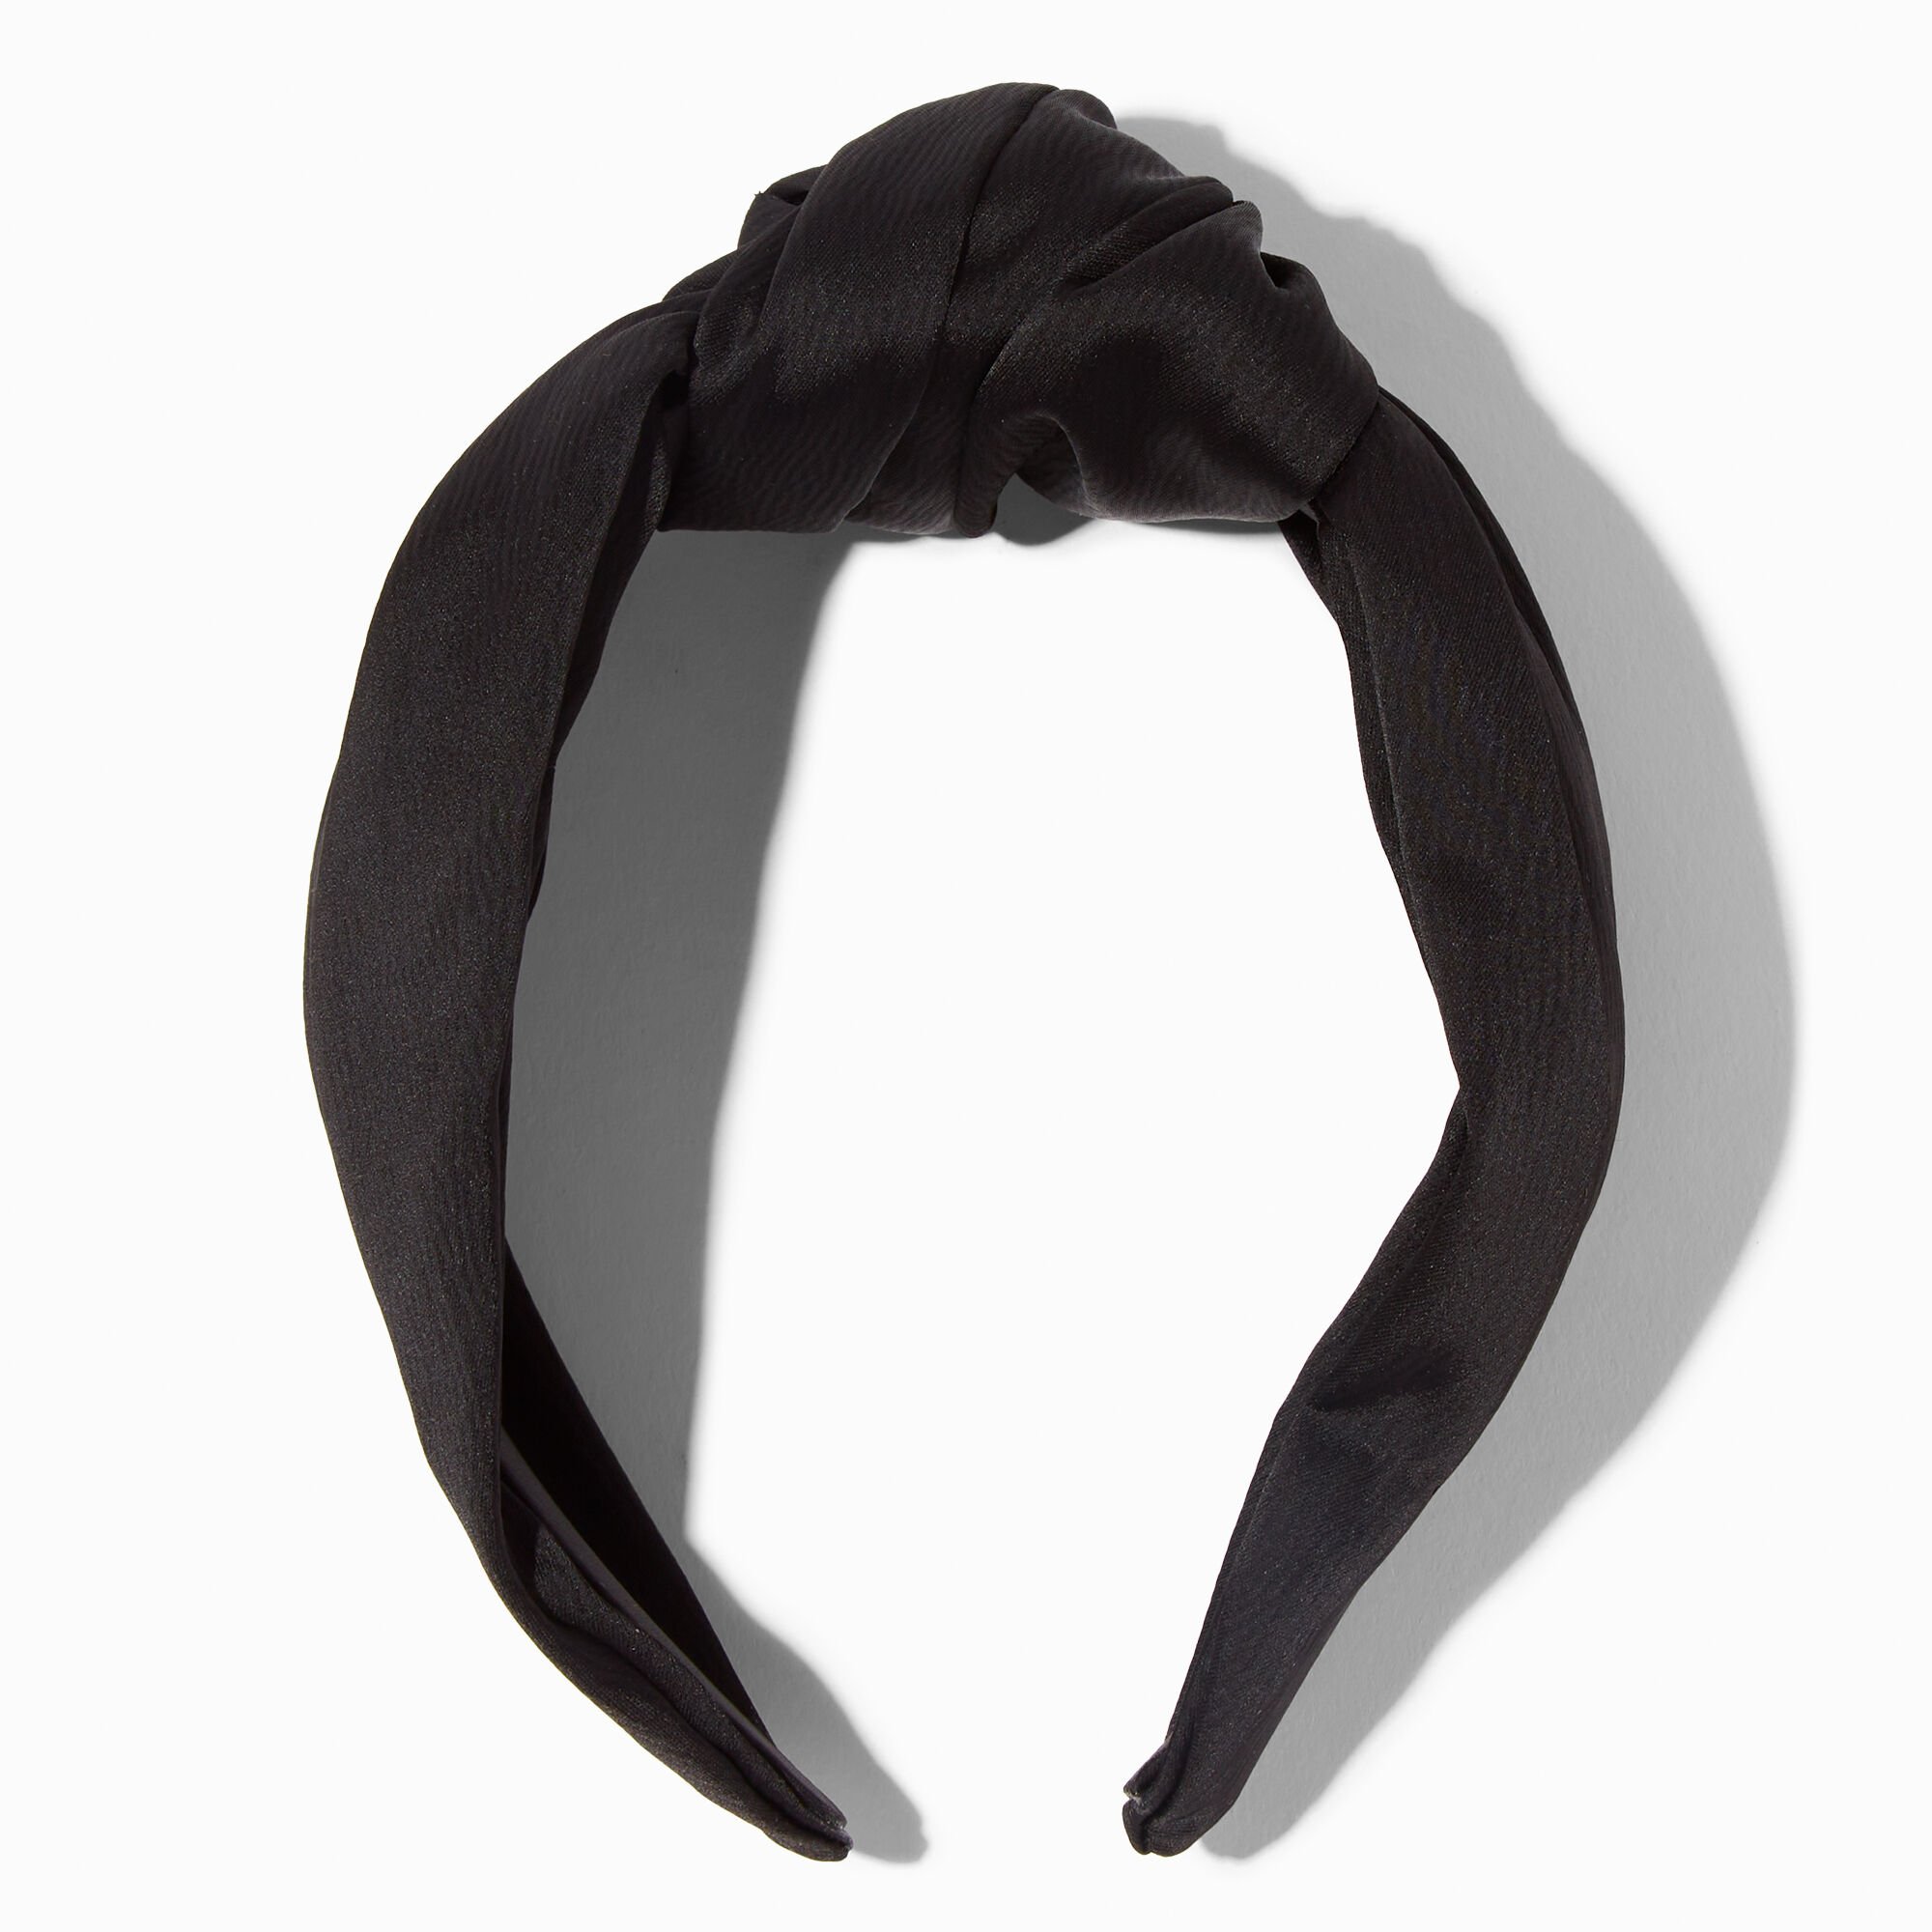 View Claires Satin Knotted Headband Black information